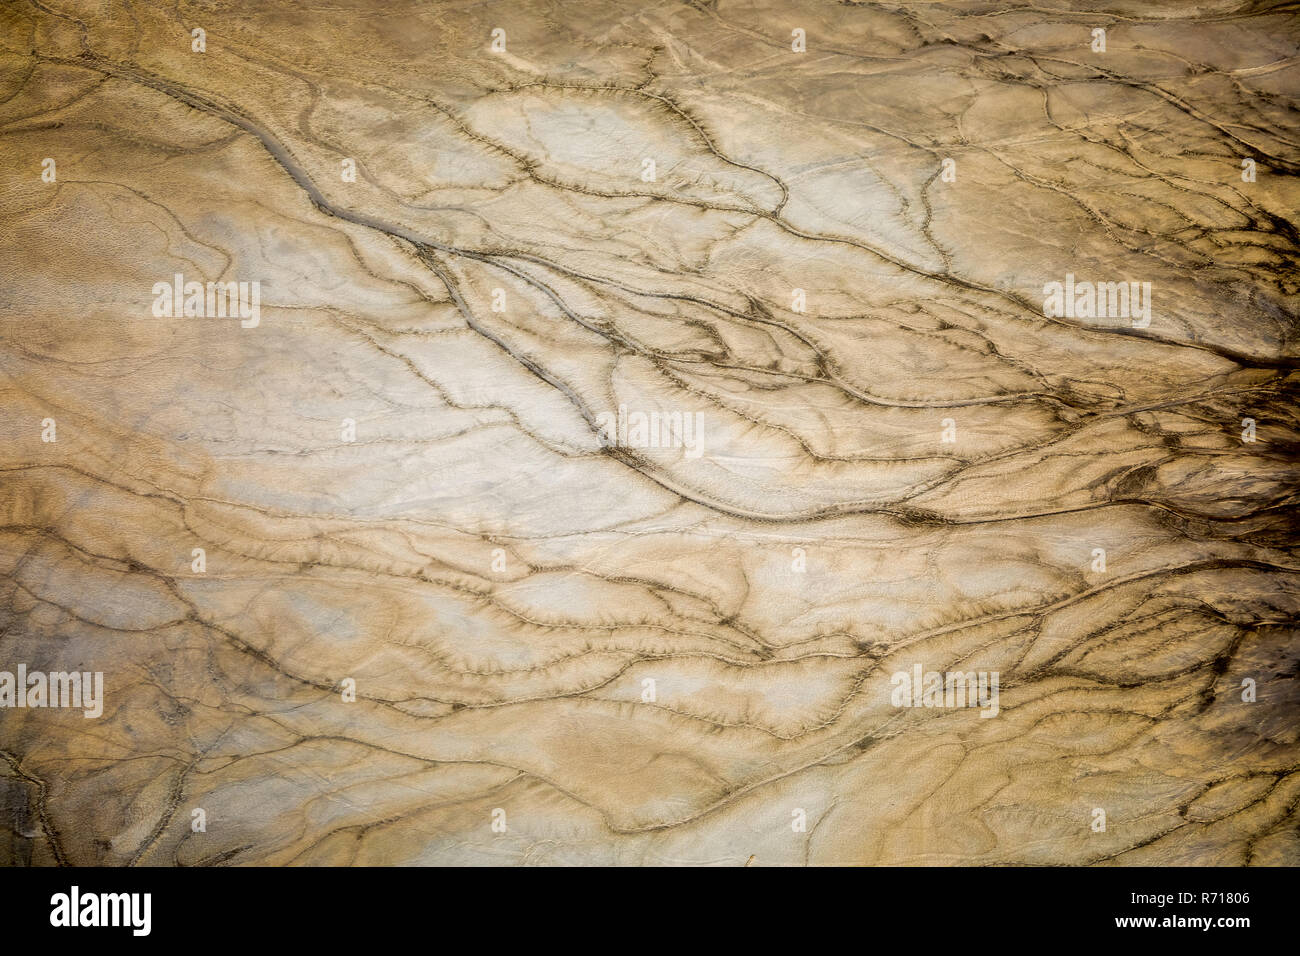 Aerial view, water veins in the lime pond, Nienburg, Latdorf, Saxony-Anhalt, Germany Stock Photo